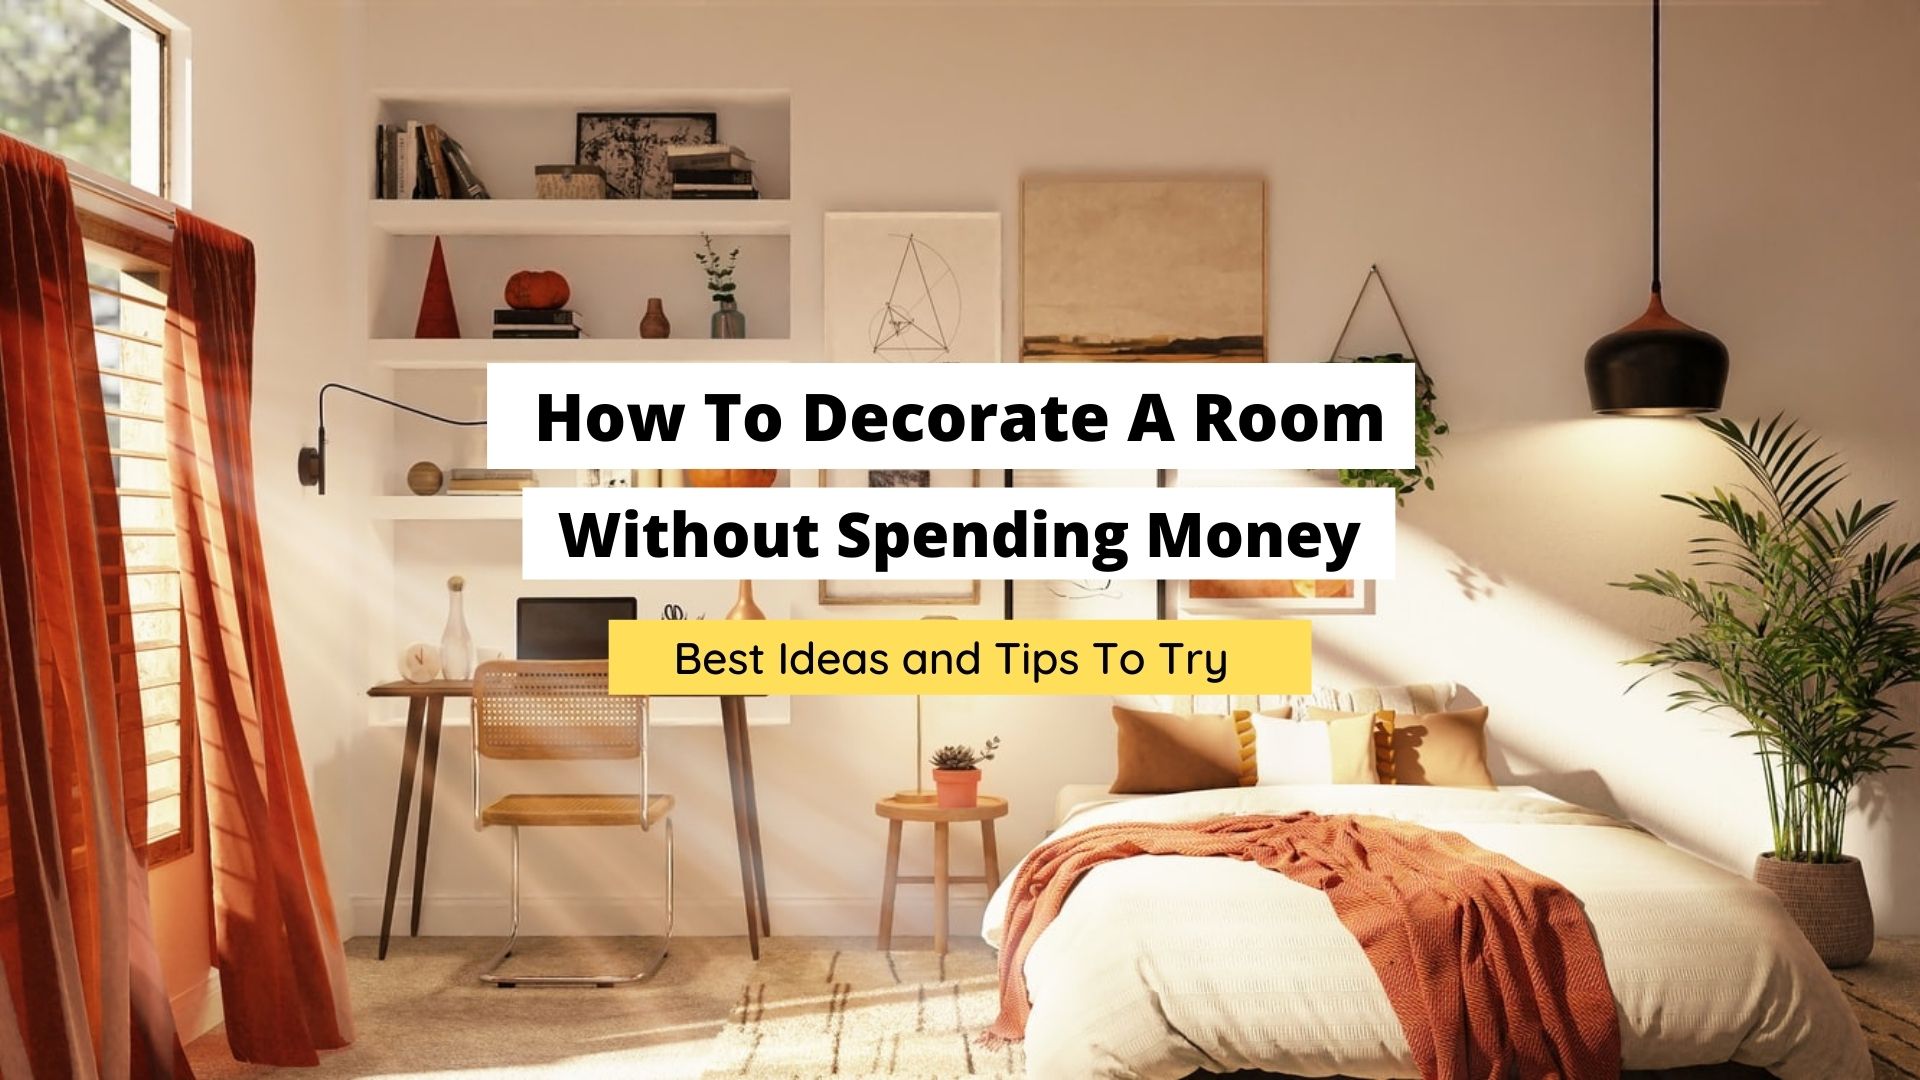 How to make your room look cool with no money?